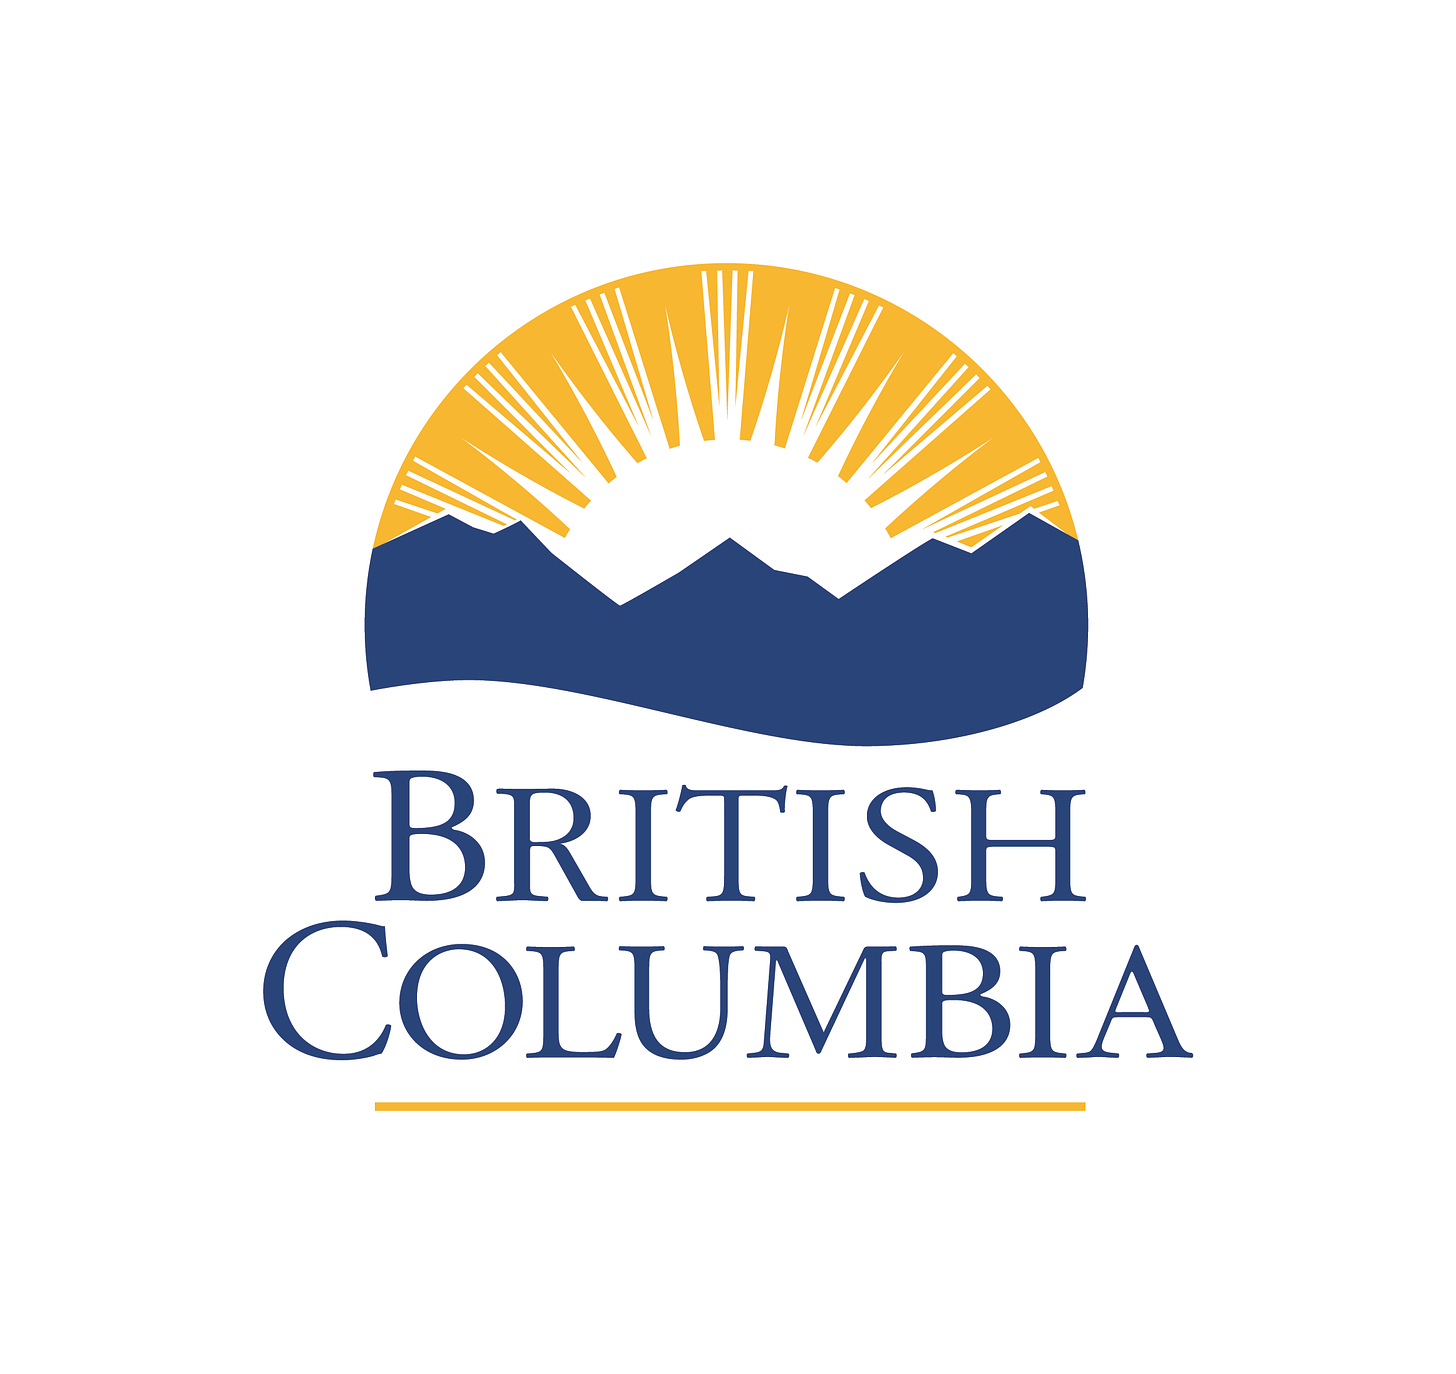 Logo of the Province of British Columbia